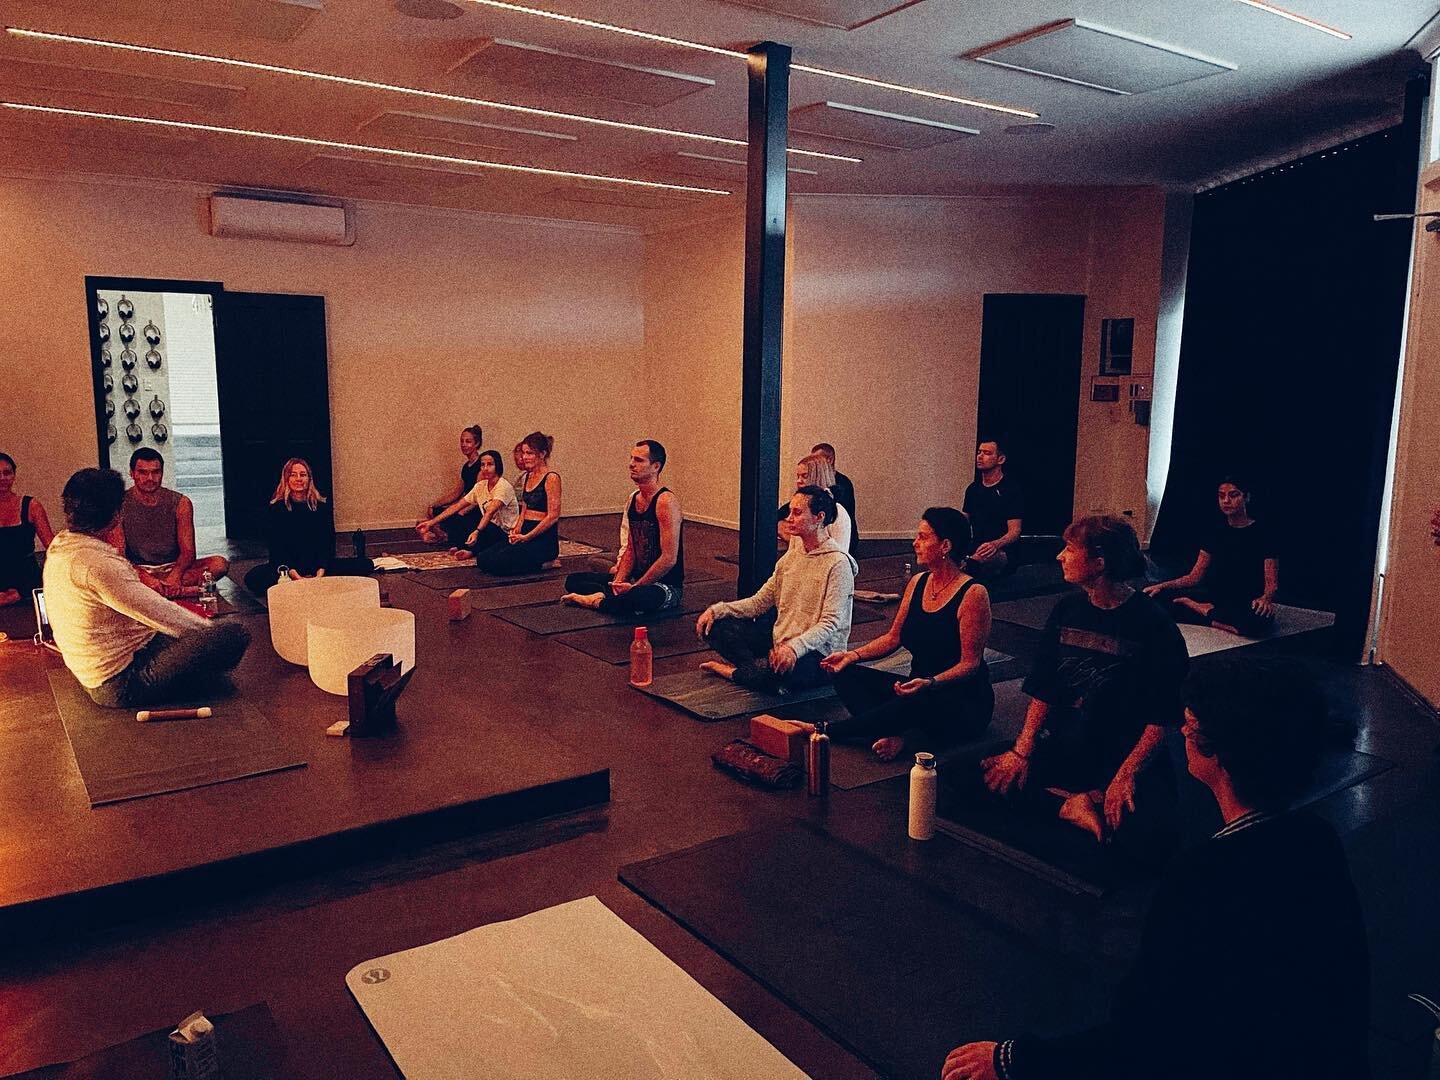 With all the changes happening across Perth, we are grateful for the students attending cntre space. We look forward to fuller classes and community as we get back to life&rsquo;s simplification ❤️ we can feel it coming ~